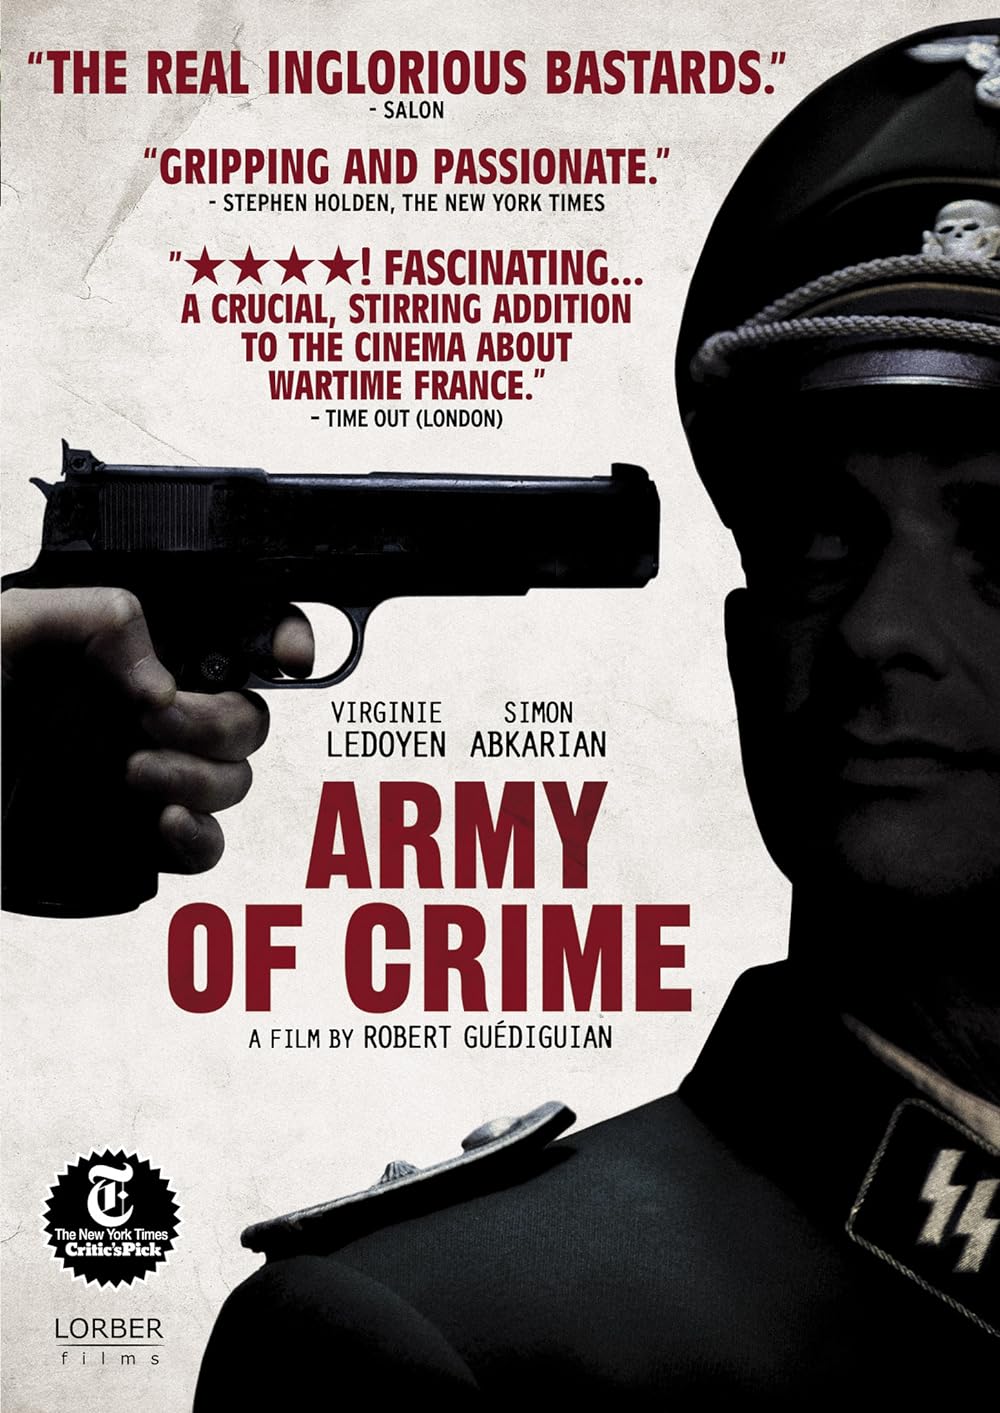 Army of Crime (2009) 1681Kbps 23.976Fps 48Khz BluRay DTS-HD MA 2.0Ch Turkish Audio TAC